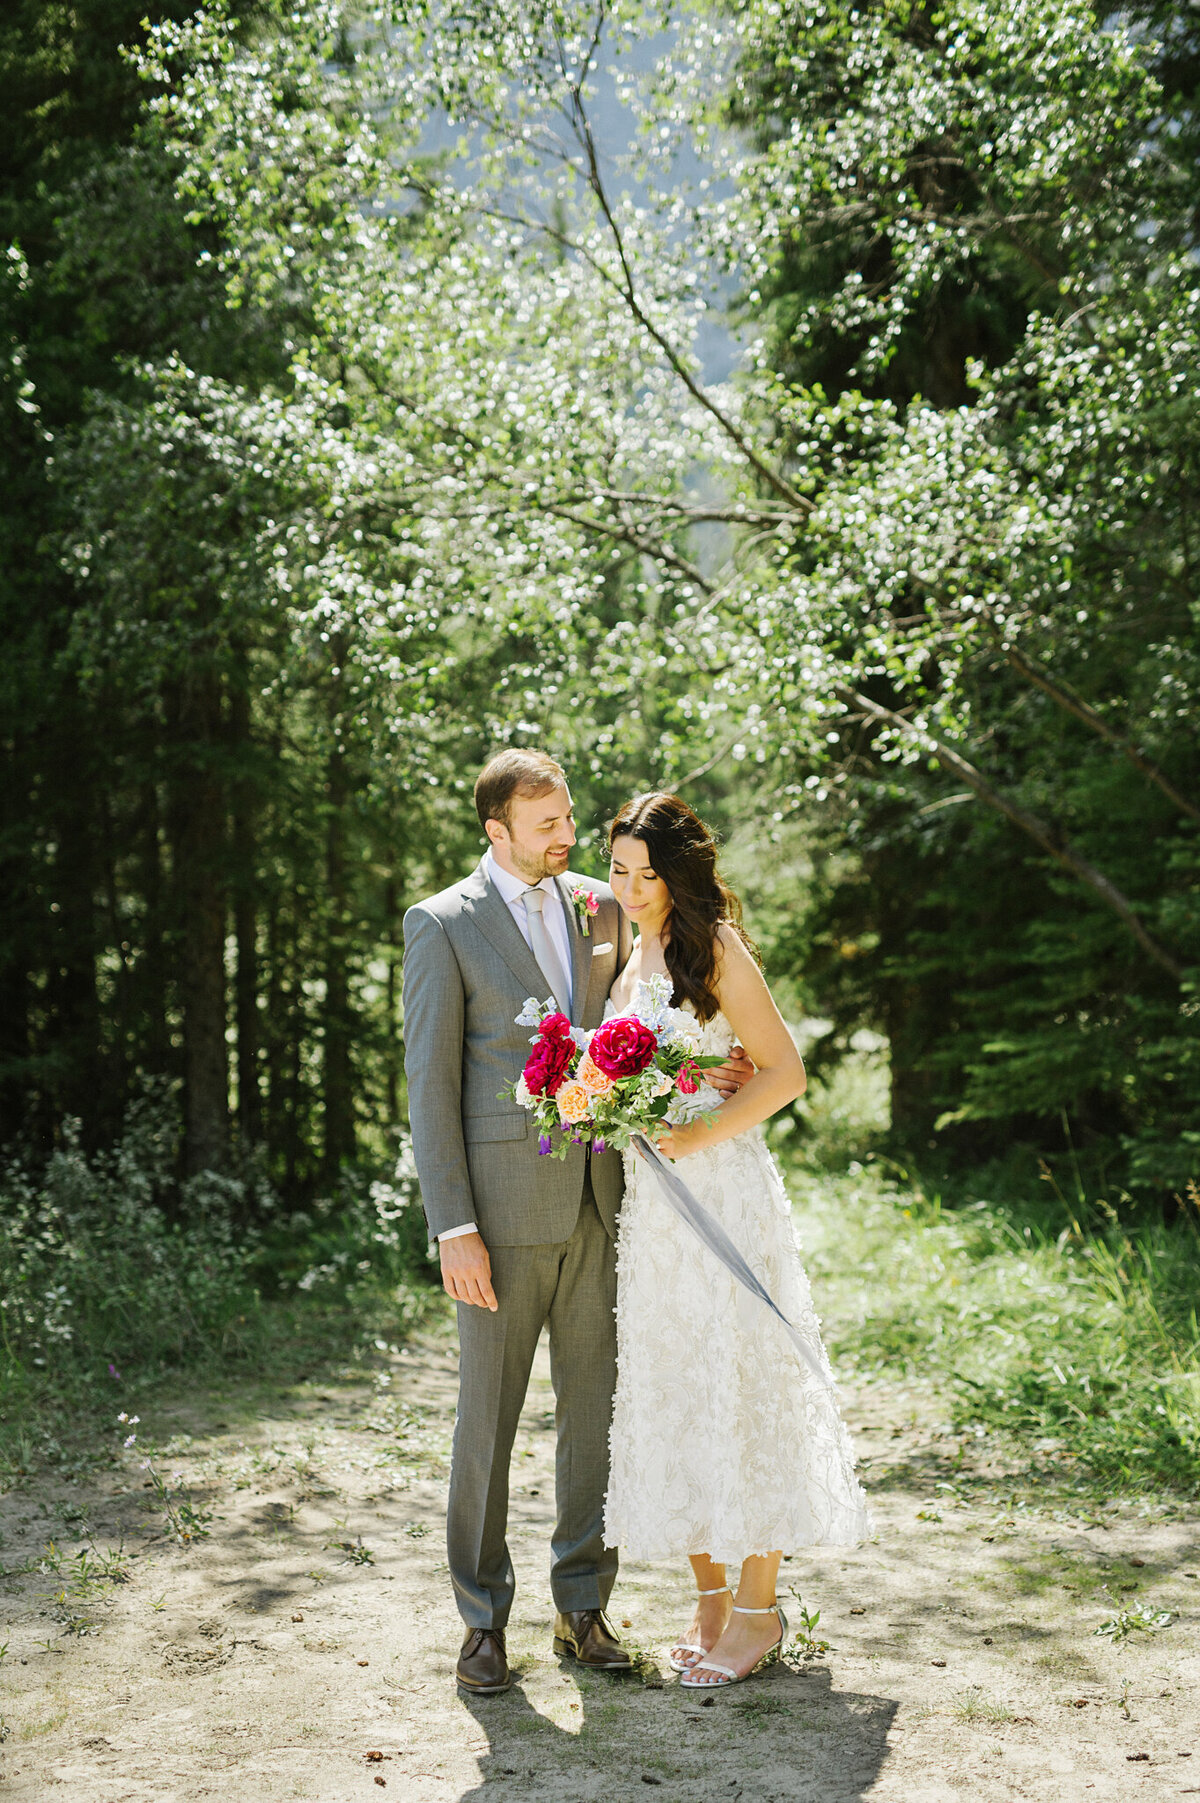 Wedding couple standing together in Calgary park, bride wearing a trendy mid-length lace gown holding a fuchsia and peach floral bouquet, groom wearing a classic grey suit and pink boutonniere, captured by Christy D. Swanberg Photography, editorial elopement and wedding photographer in Calgary, Alberta, featured on the Bronte Bride Vendor Guide.